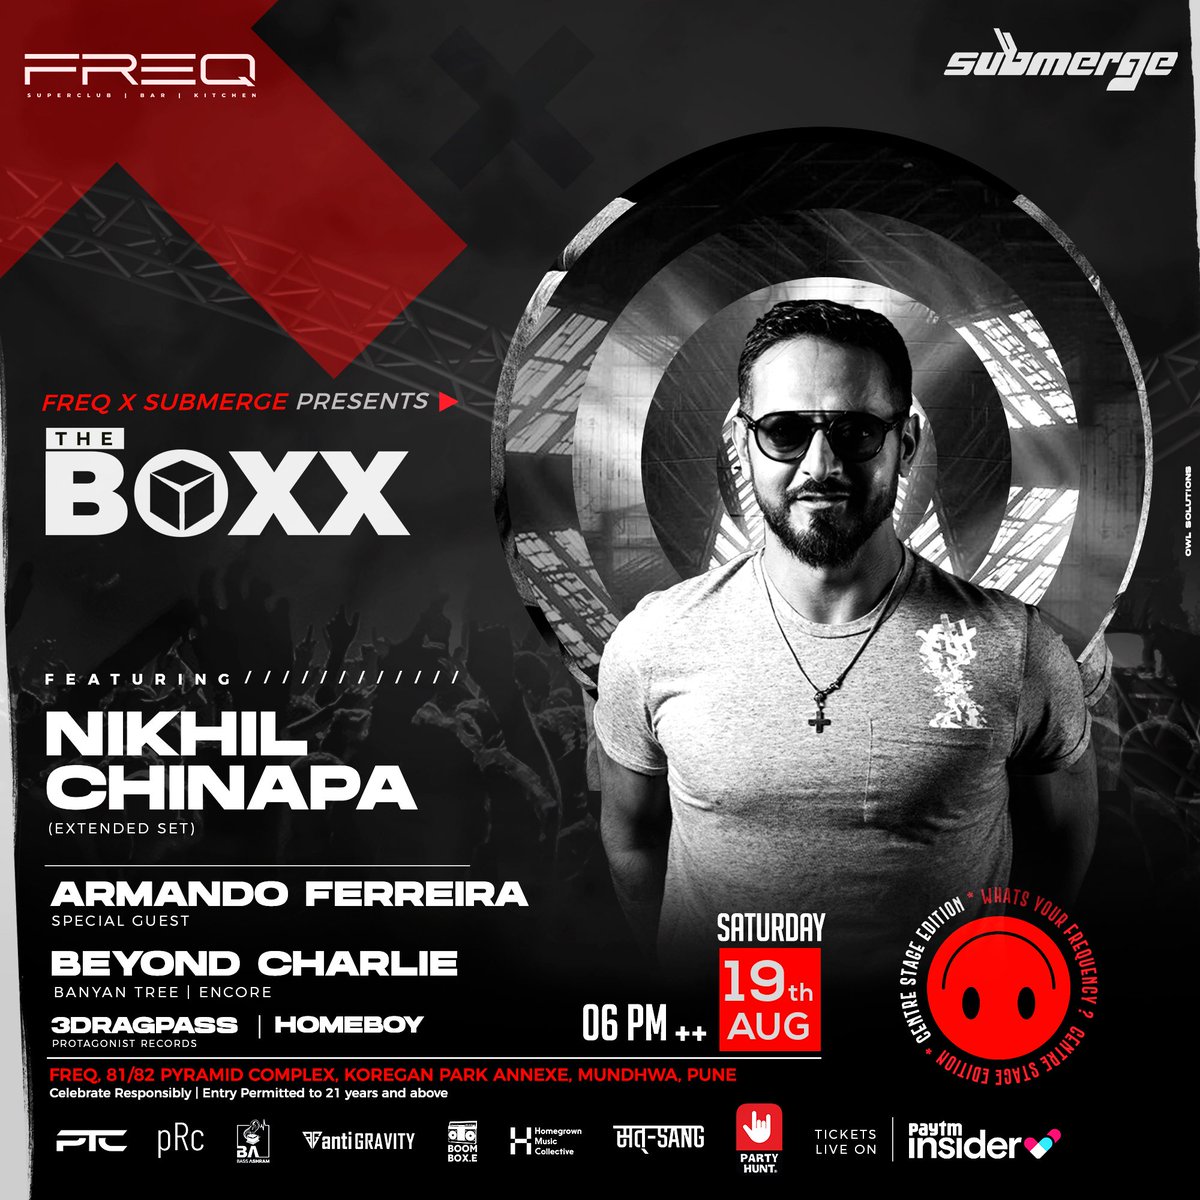 In #Pune next Saturday. I’ve got a TON of new music to share. See you at #TheBOXX 

PLUS @armandocalvares is joining the party! ☀️🎉🙌

@Submergemusic @FreqClub